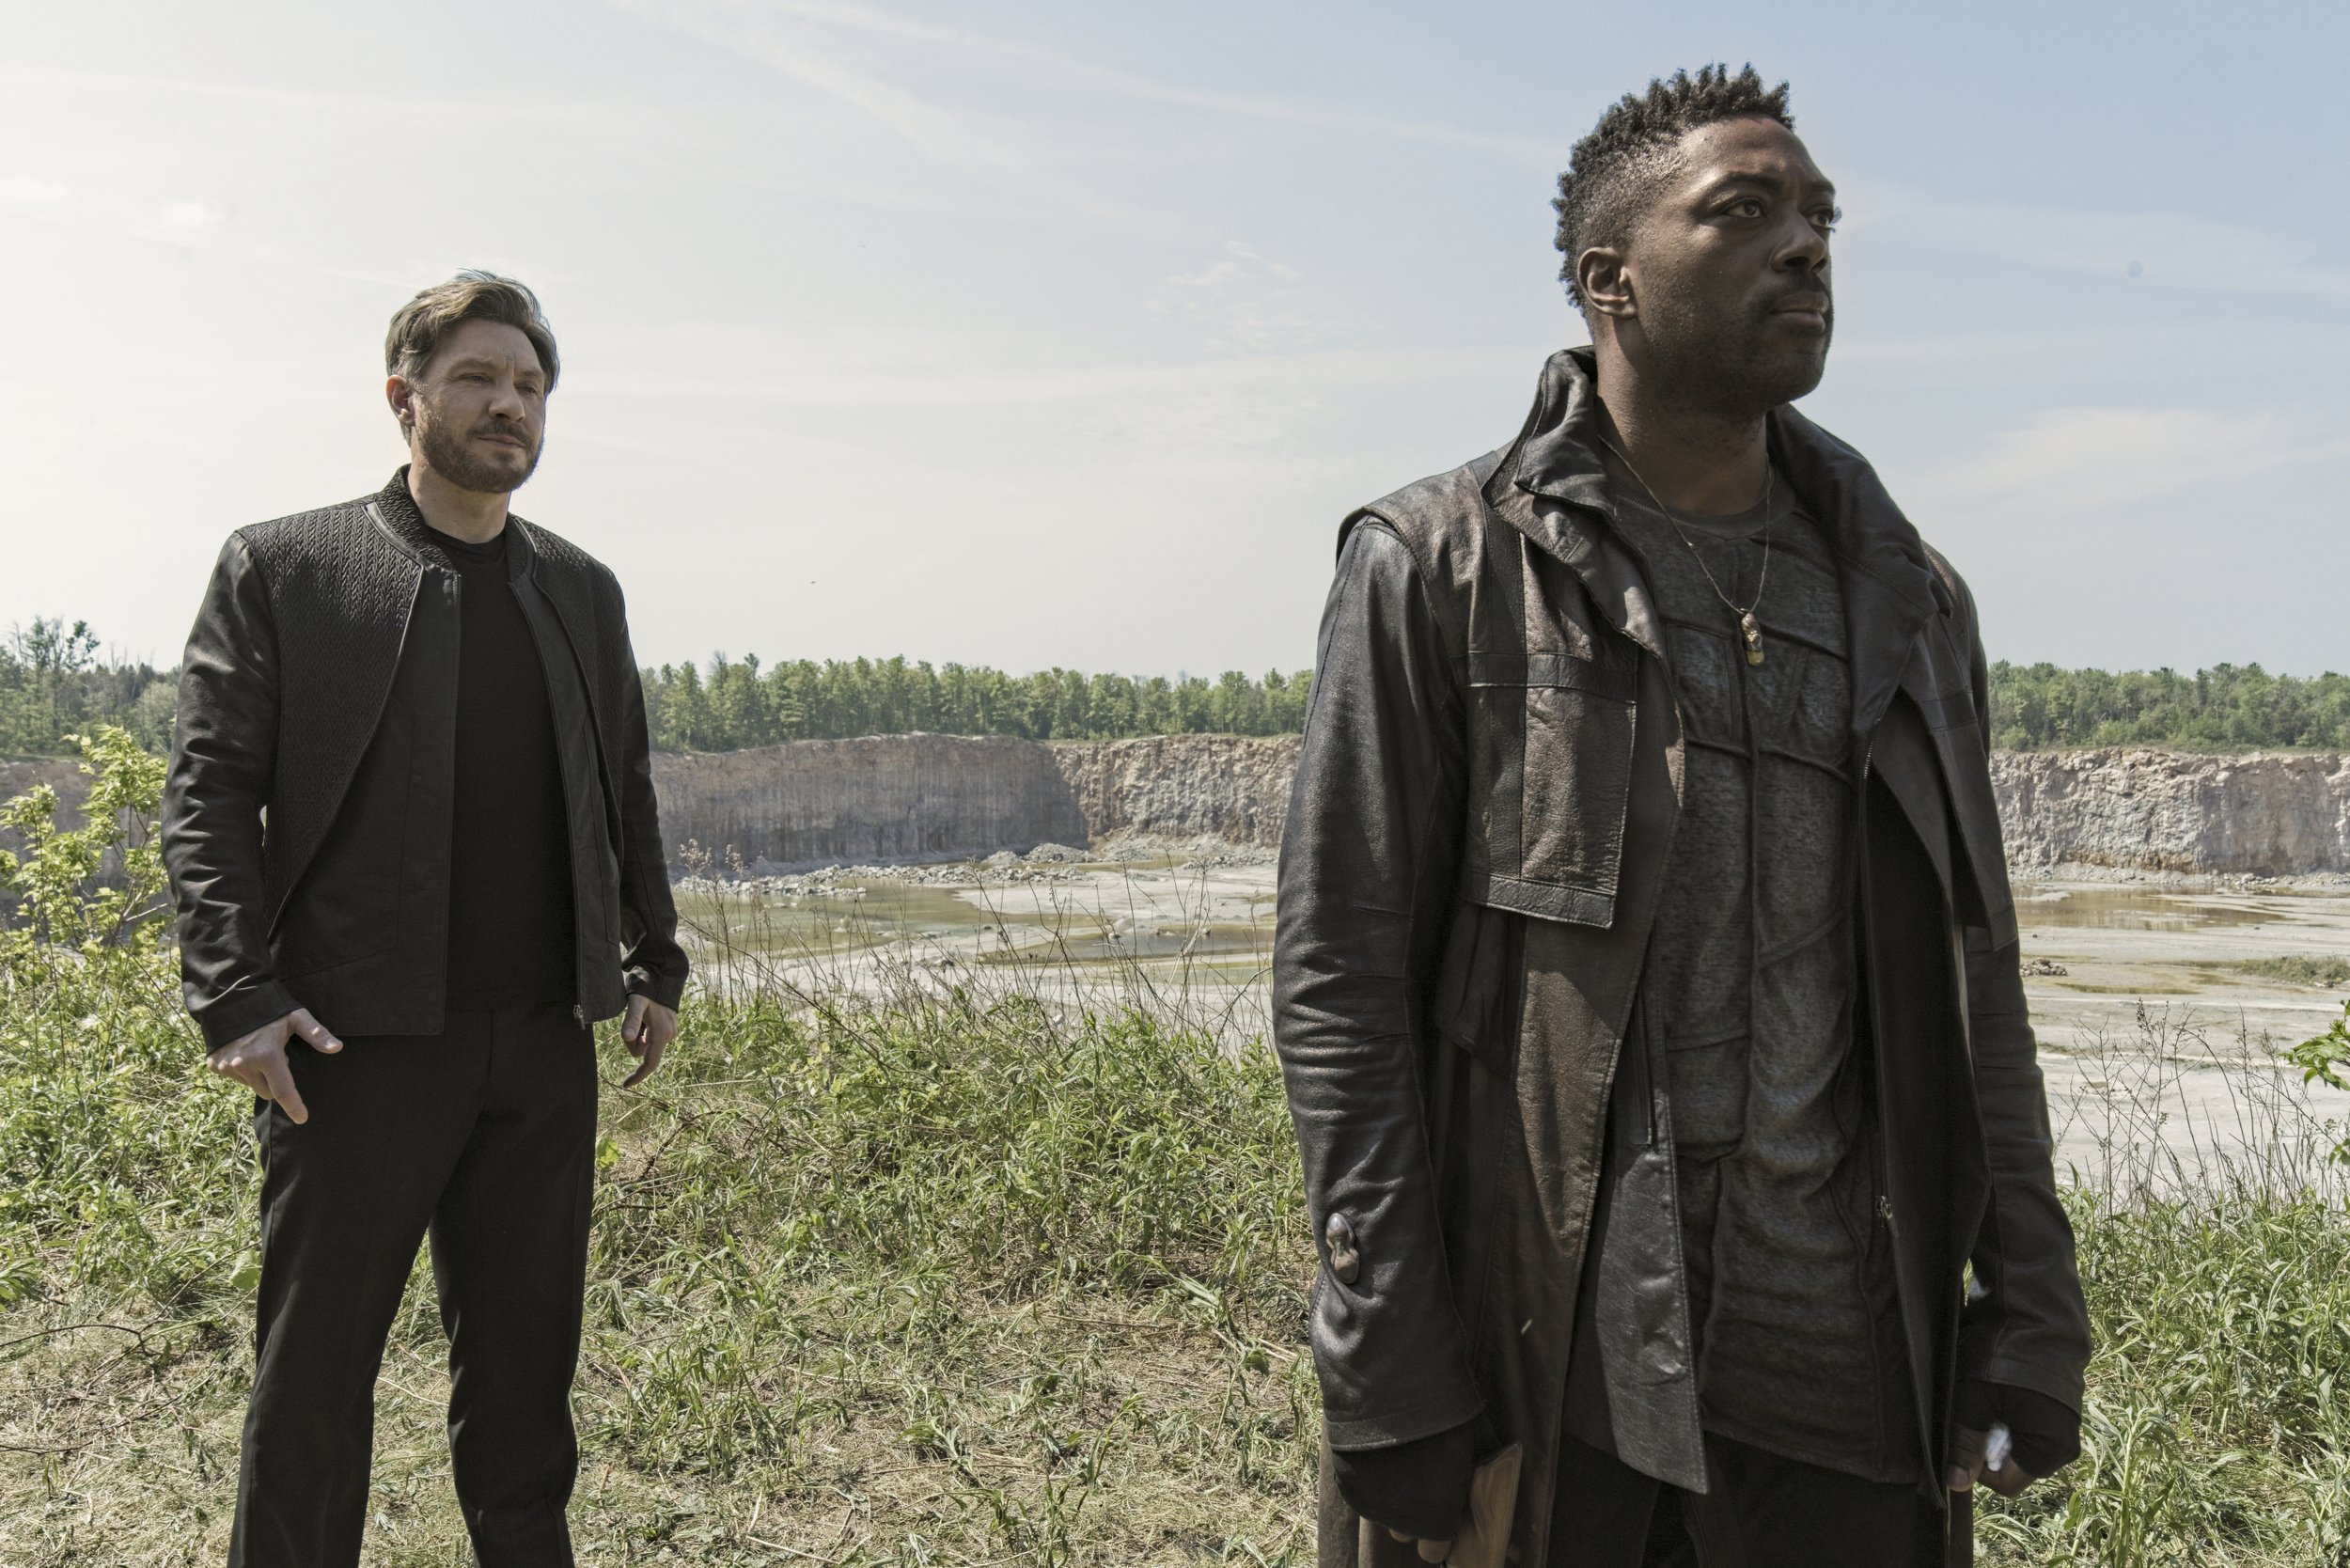   Pictured: Shawn Doyle as Ruon Tarka and David Ajala as Book of the Paramount+ original series STAR TREK: DISCOVERY. Photo Cr: Michael Gibson/Paramount+ (C) 2021 CBS Interactive. All Rights Reserved.  